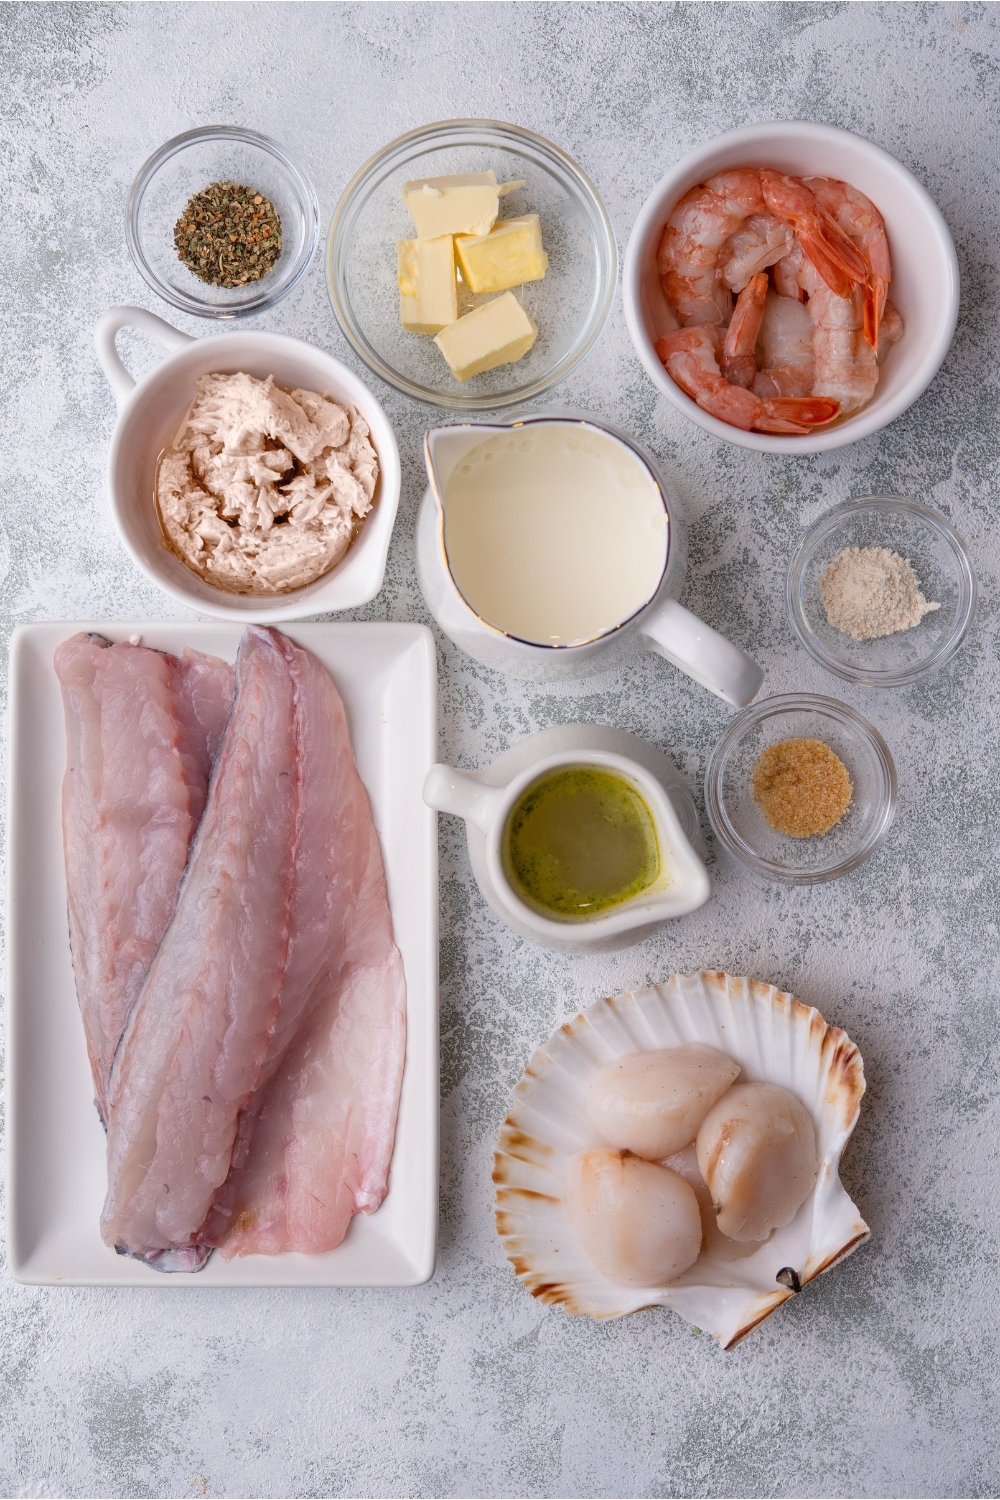 An assortment of ingredients including a plate of fish fillets and bowls of raw shrimp, scallops, crab meat, spices, butter, and cream.